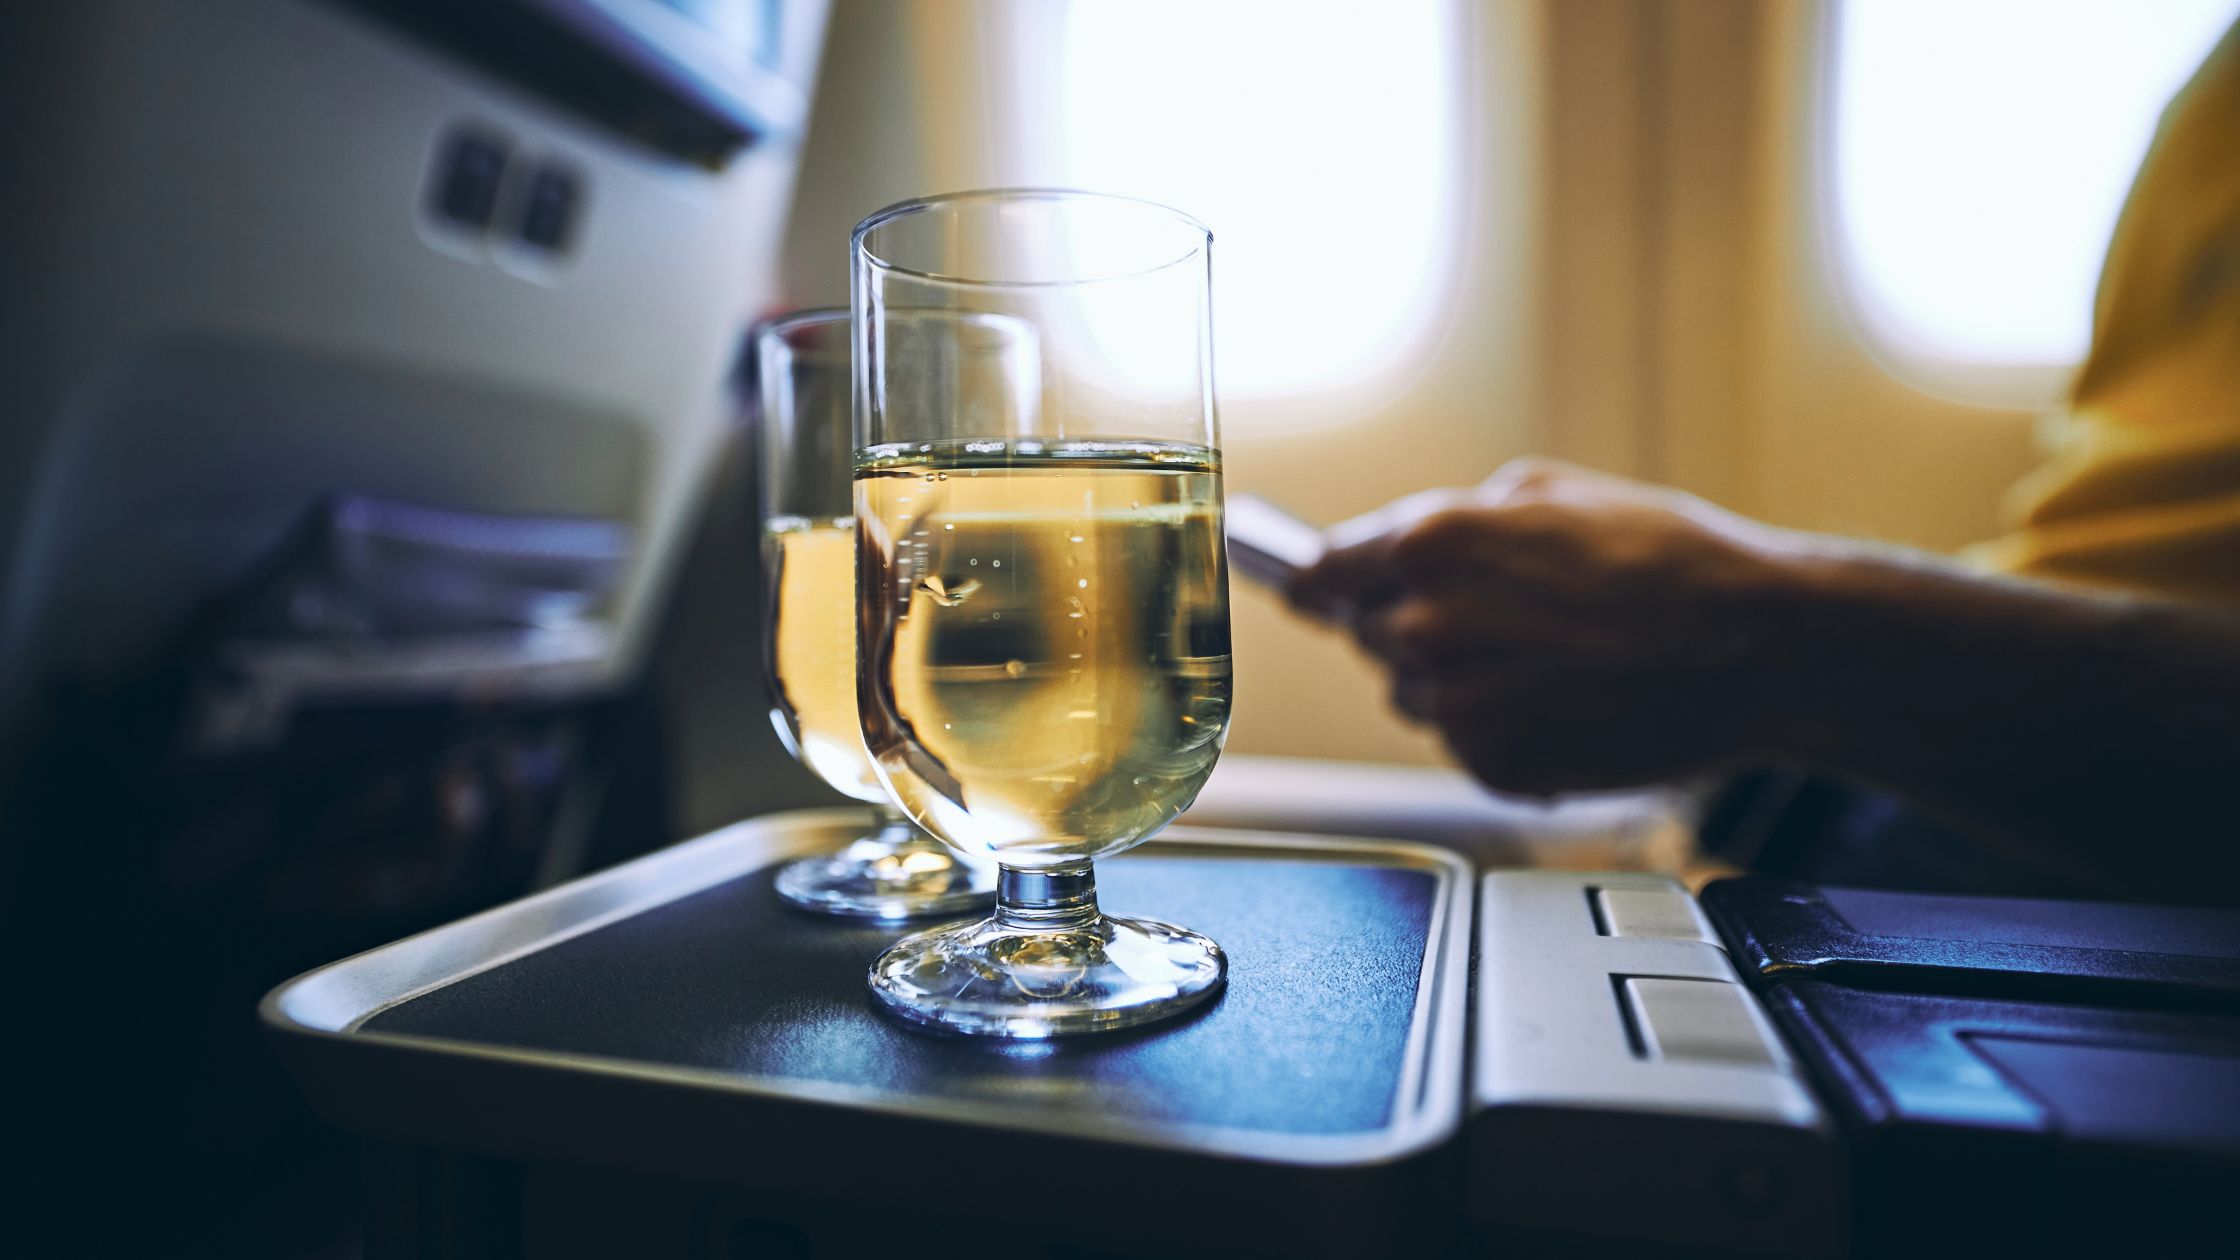 Two Glasses of Alcohol in a plane